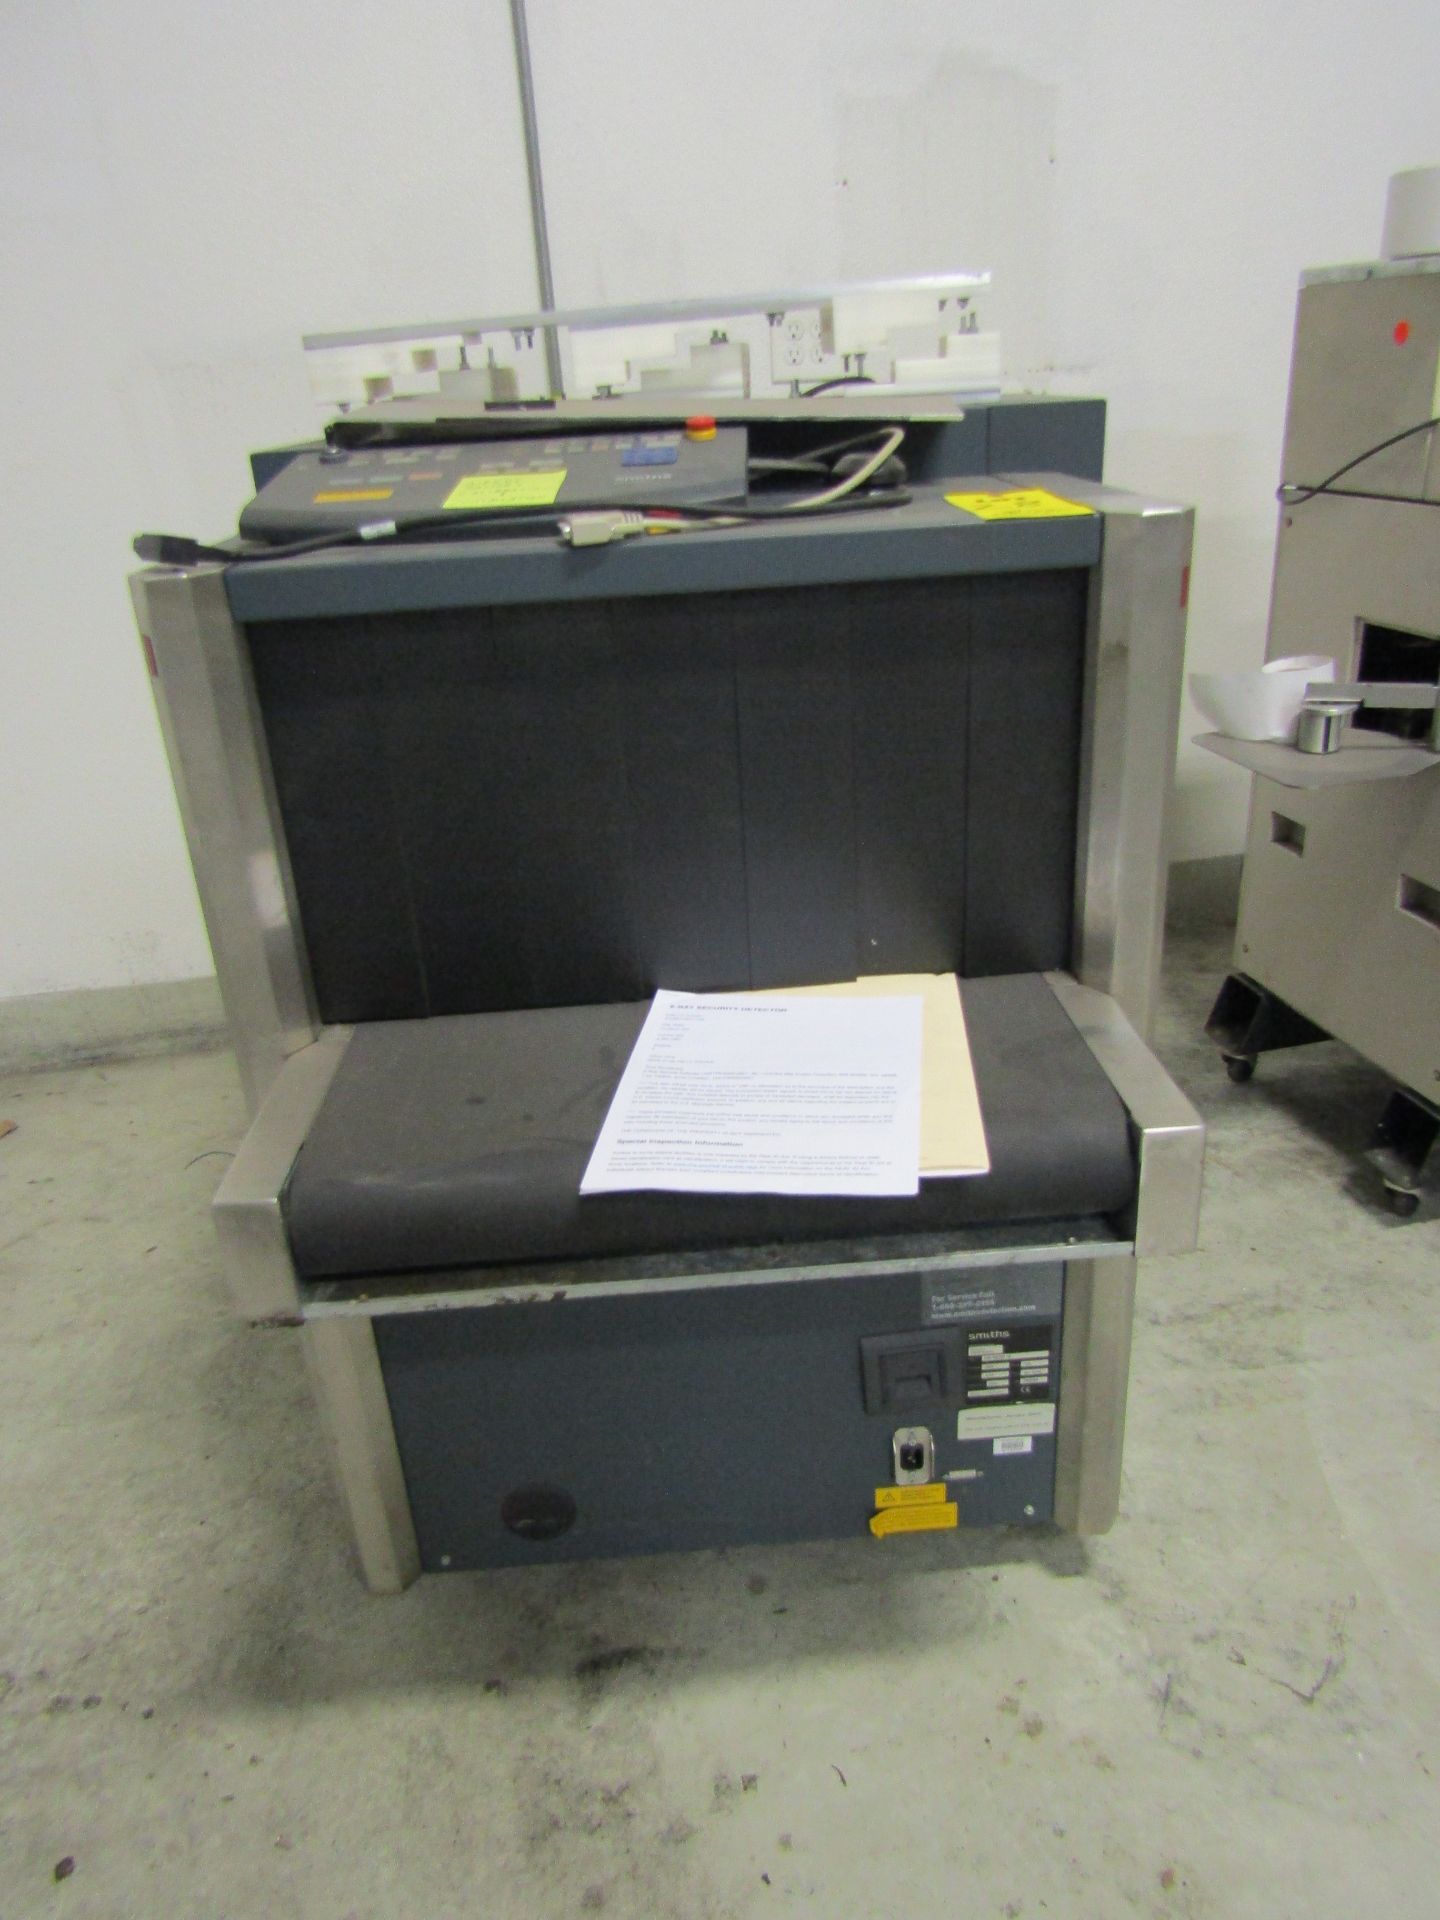 SMITHS HEIMANN Security X-Ray Unit, Model HS 6030 DI, With Conveyor and Control, S/N 26569 **Needs